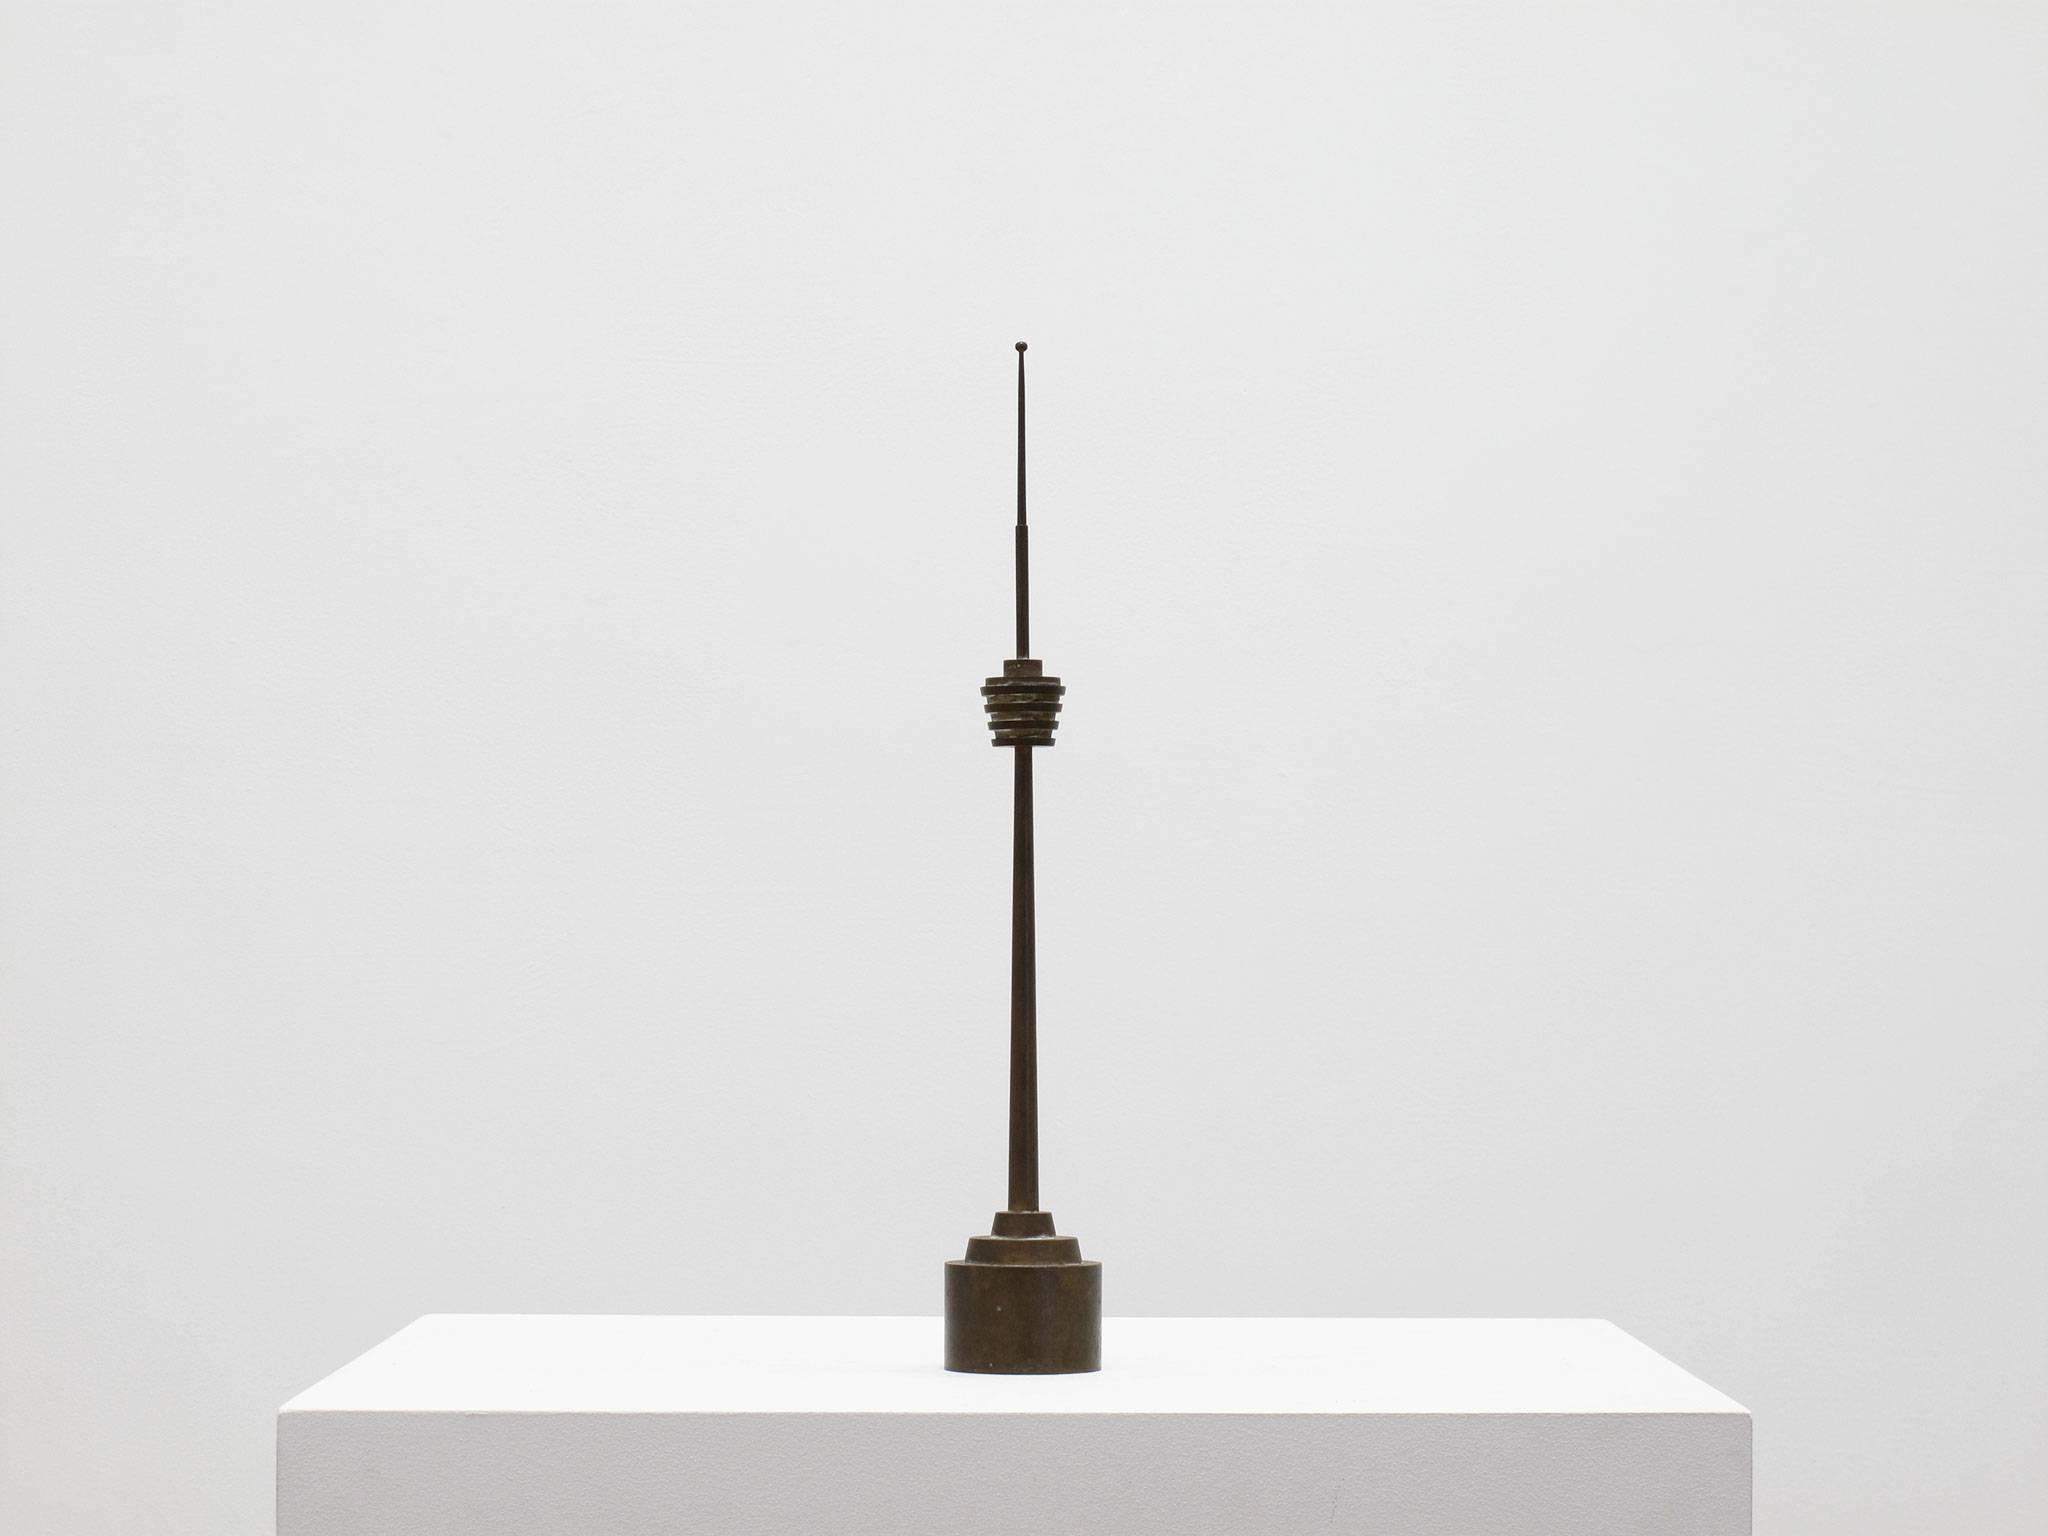 'Fernsehturm', Germany, 1960s
Scaled model sized replica of a television communication tower
Solid brass, handmade, spun on a lathe

Measurements in inches: 15.25 high x 2.25 base diameter

Condition: excellent vintage, contact us for a full